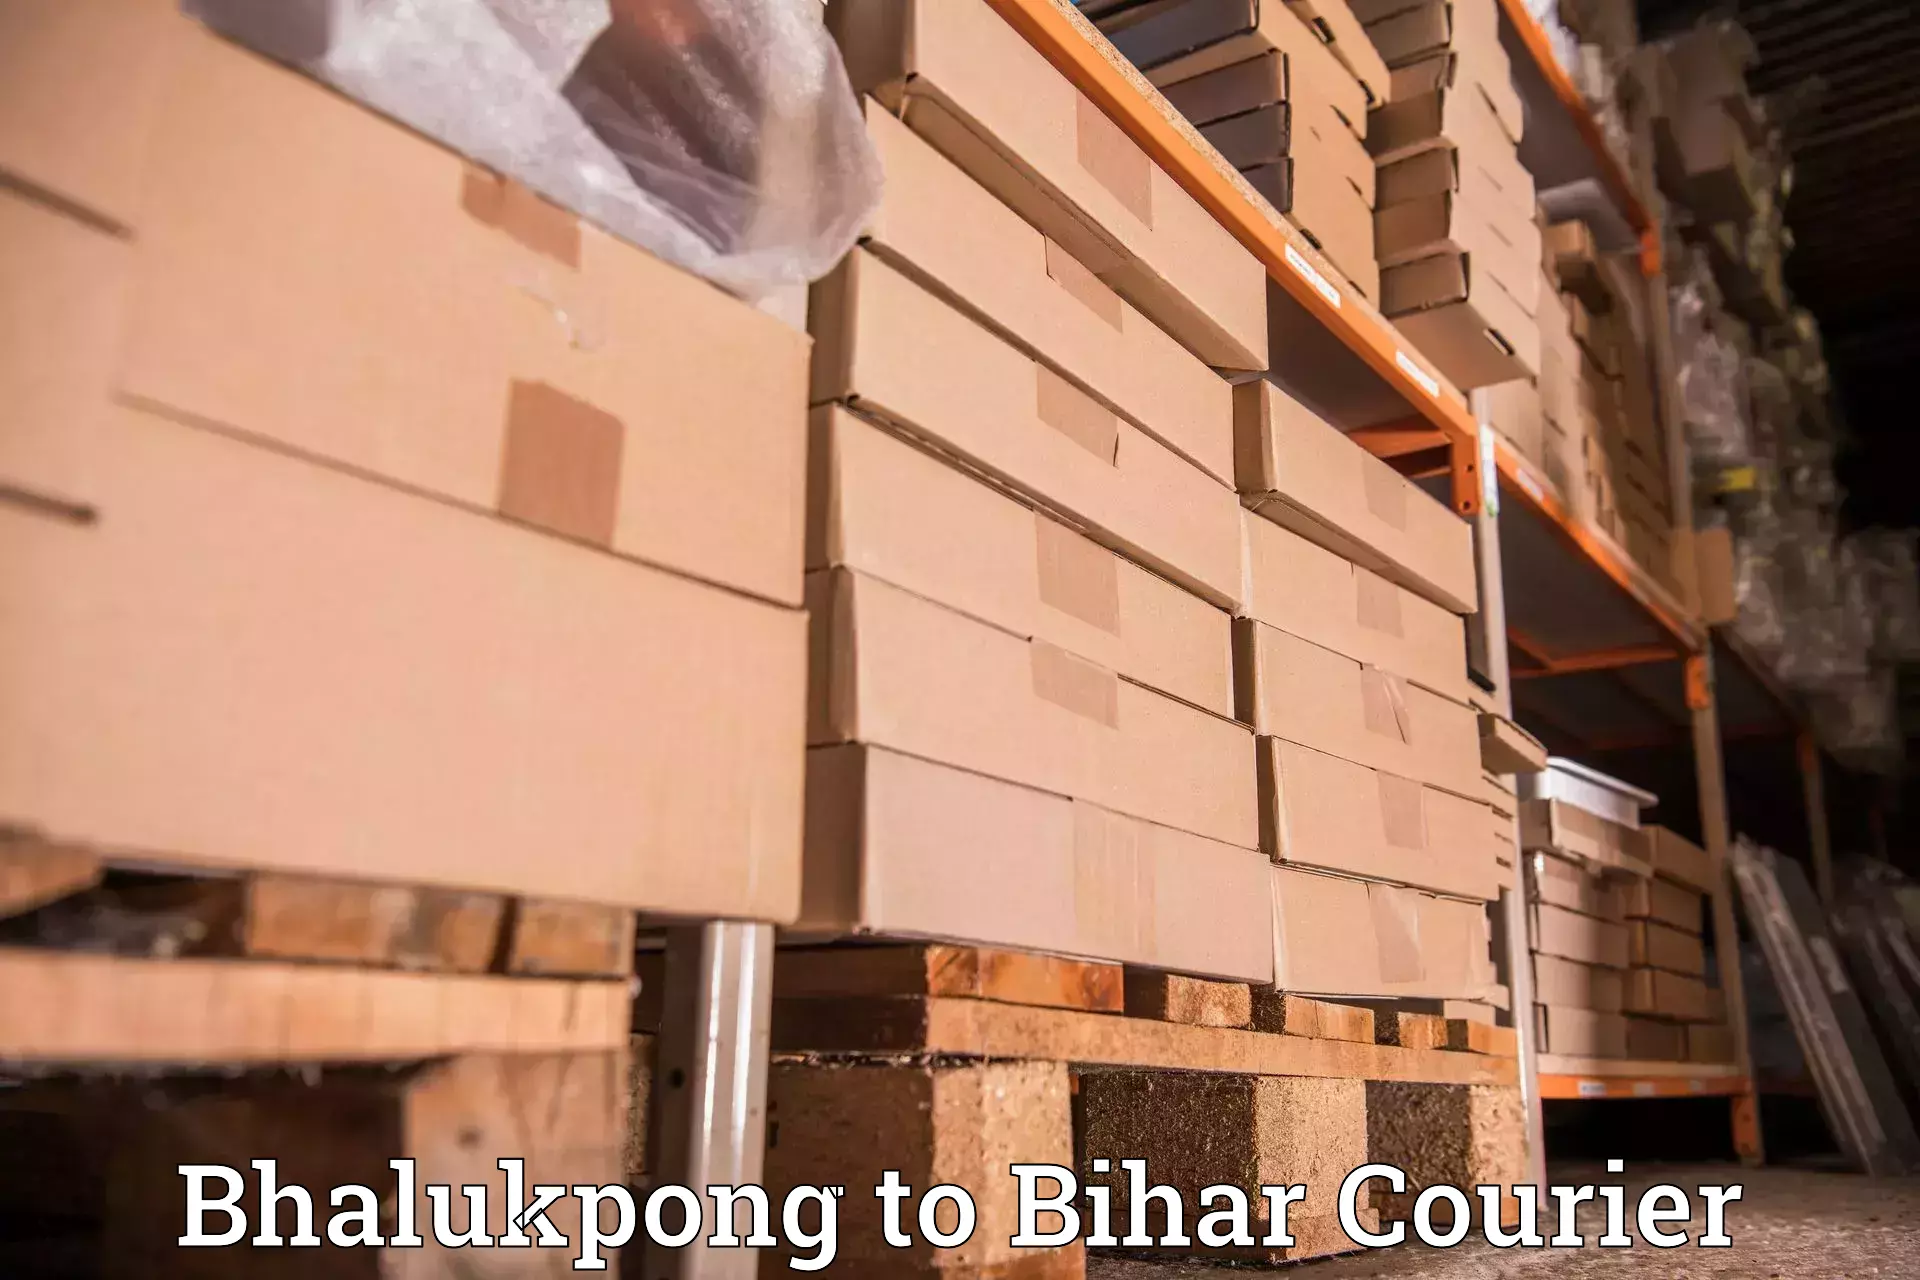 Courier service comparison Bhalukpong to Ghogha